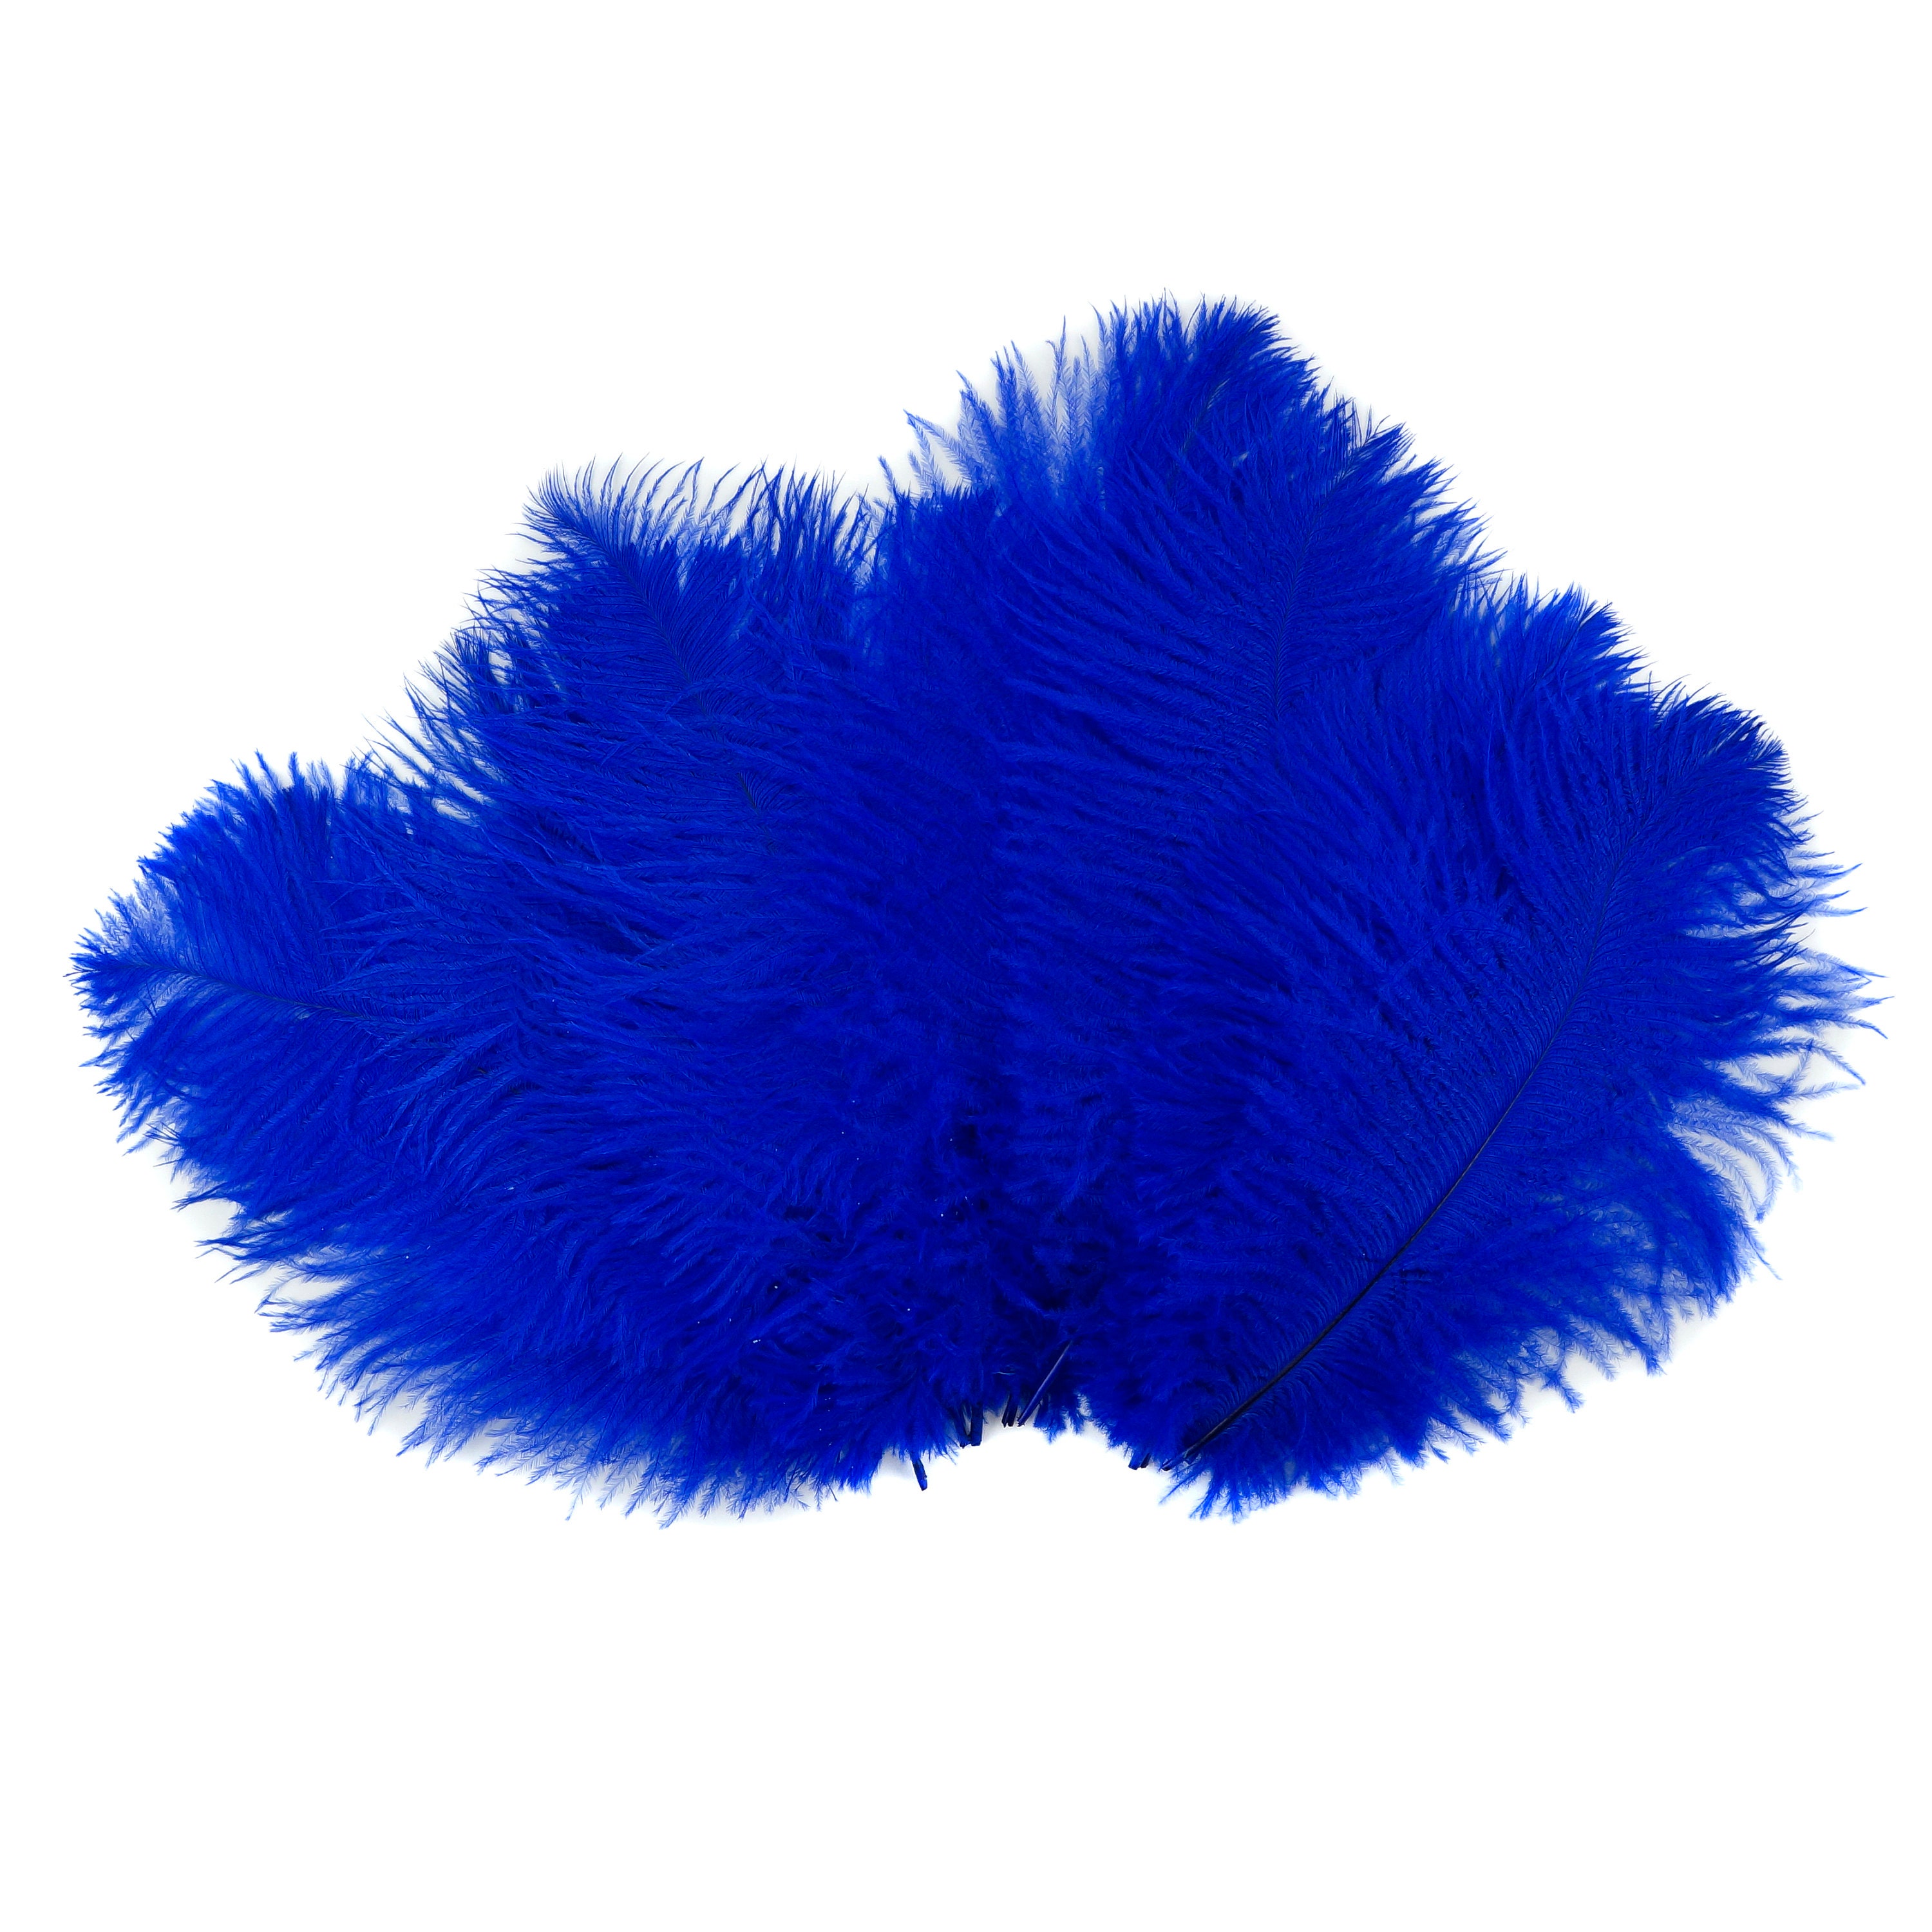 Ostrich Feathers, 1 to 100 Pieces, 9-12 ROYAL Blue Ostrich Feather ...